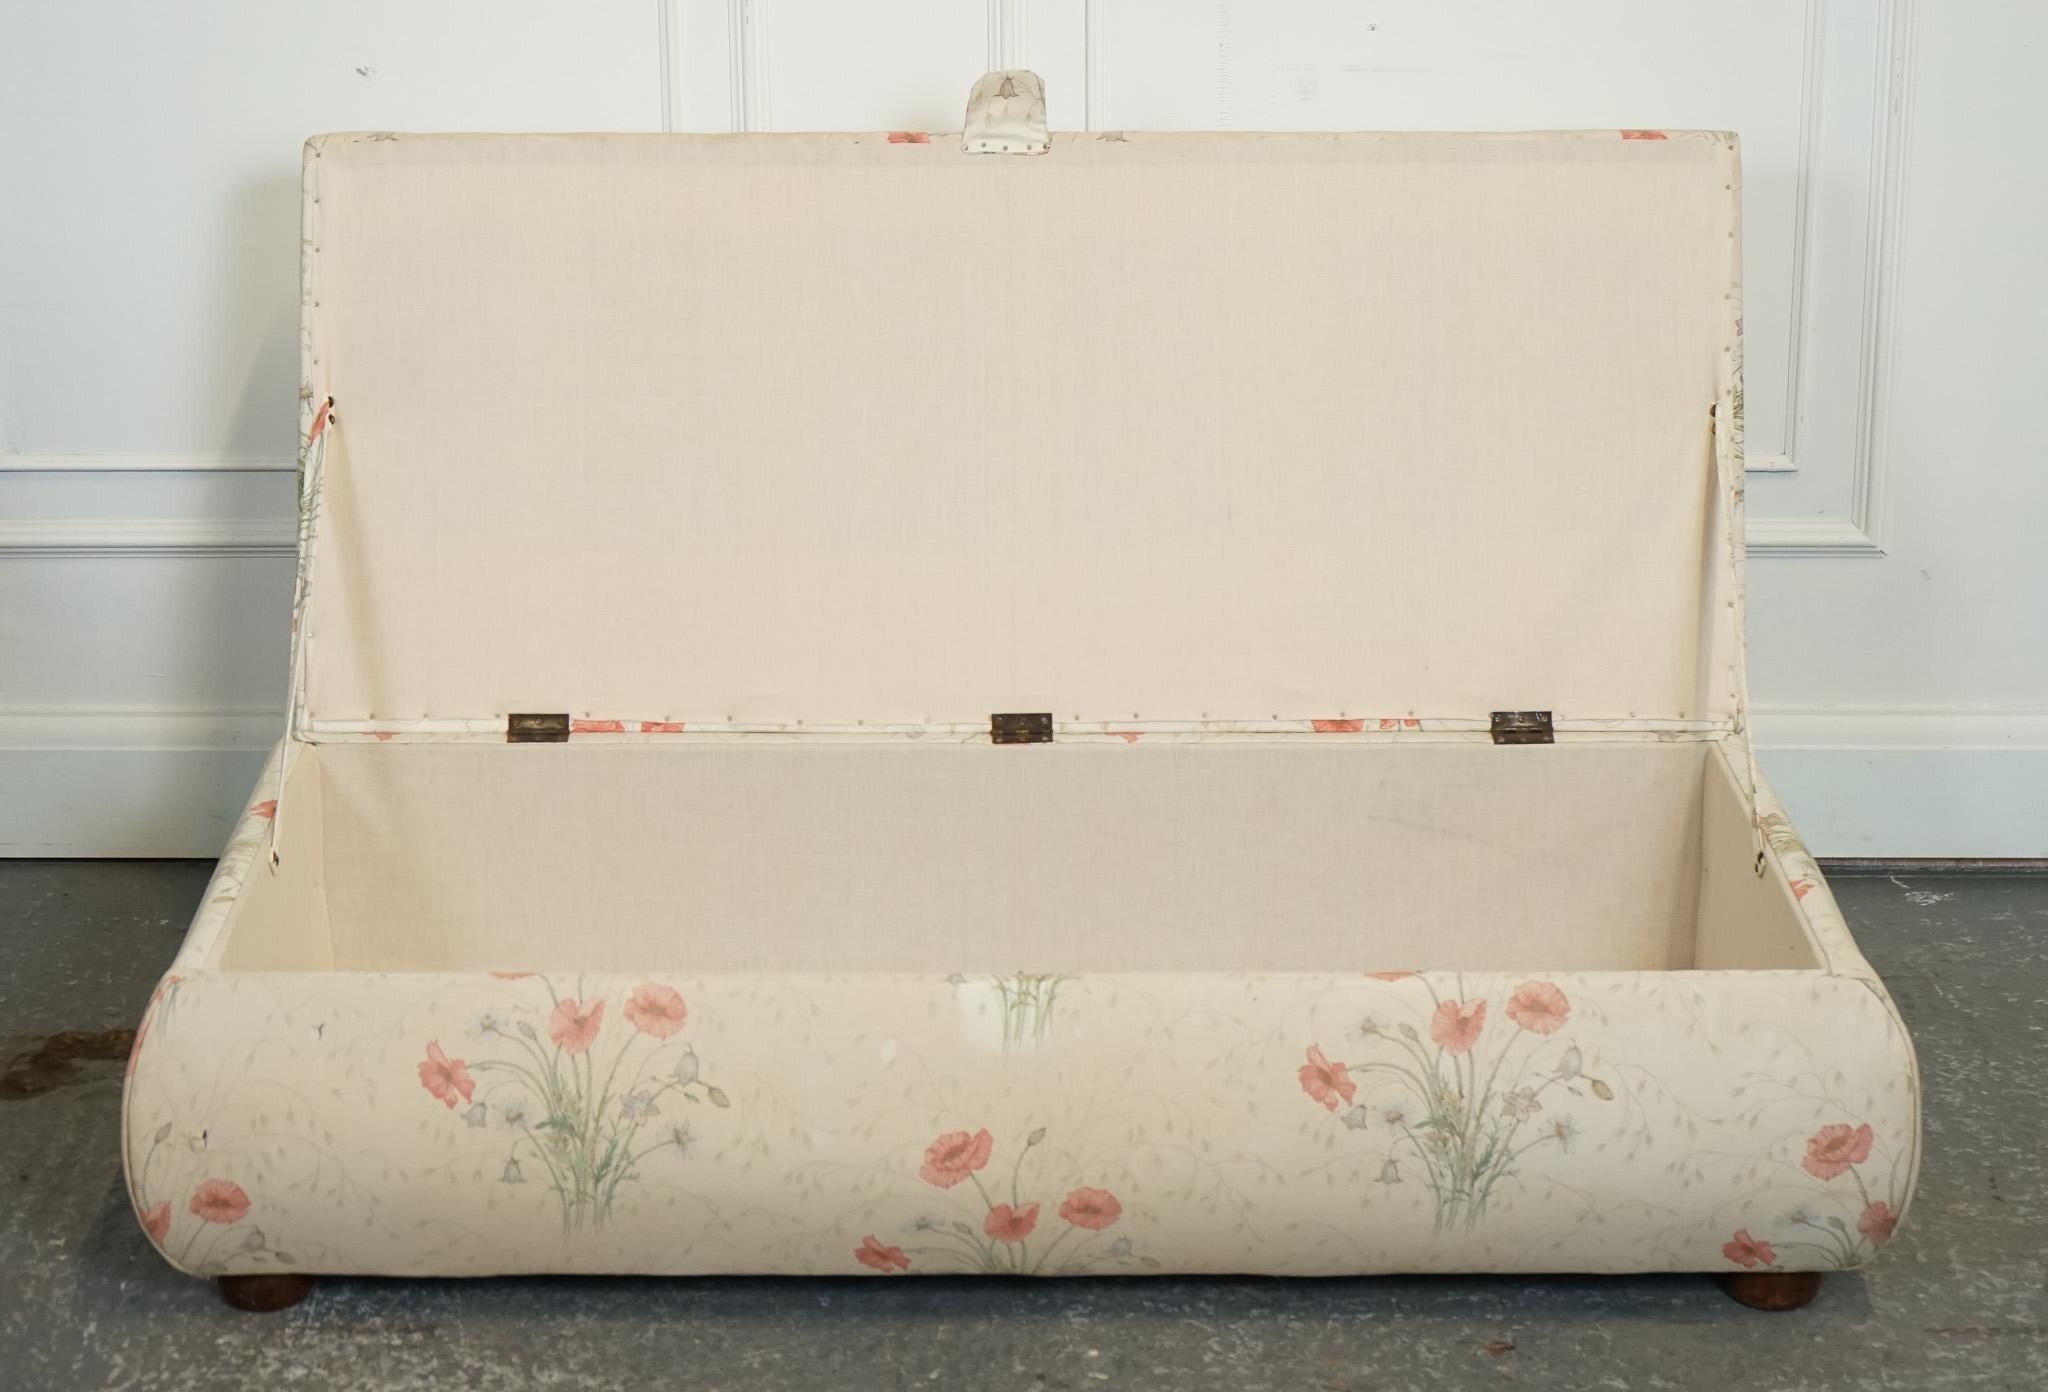 LARGE ANTIQUE VICTORIAN POPPY FLOWER PATTERN FABRiC OTTOMAN CHEST TRUNK  J1 In Good Condition For Sale In Pulborough, GB